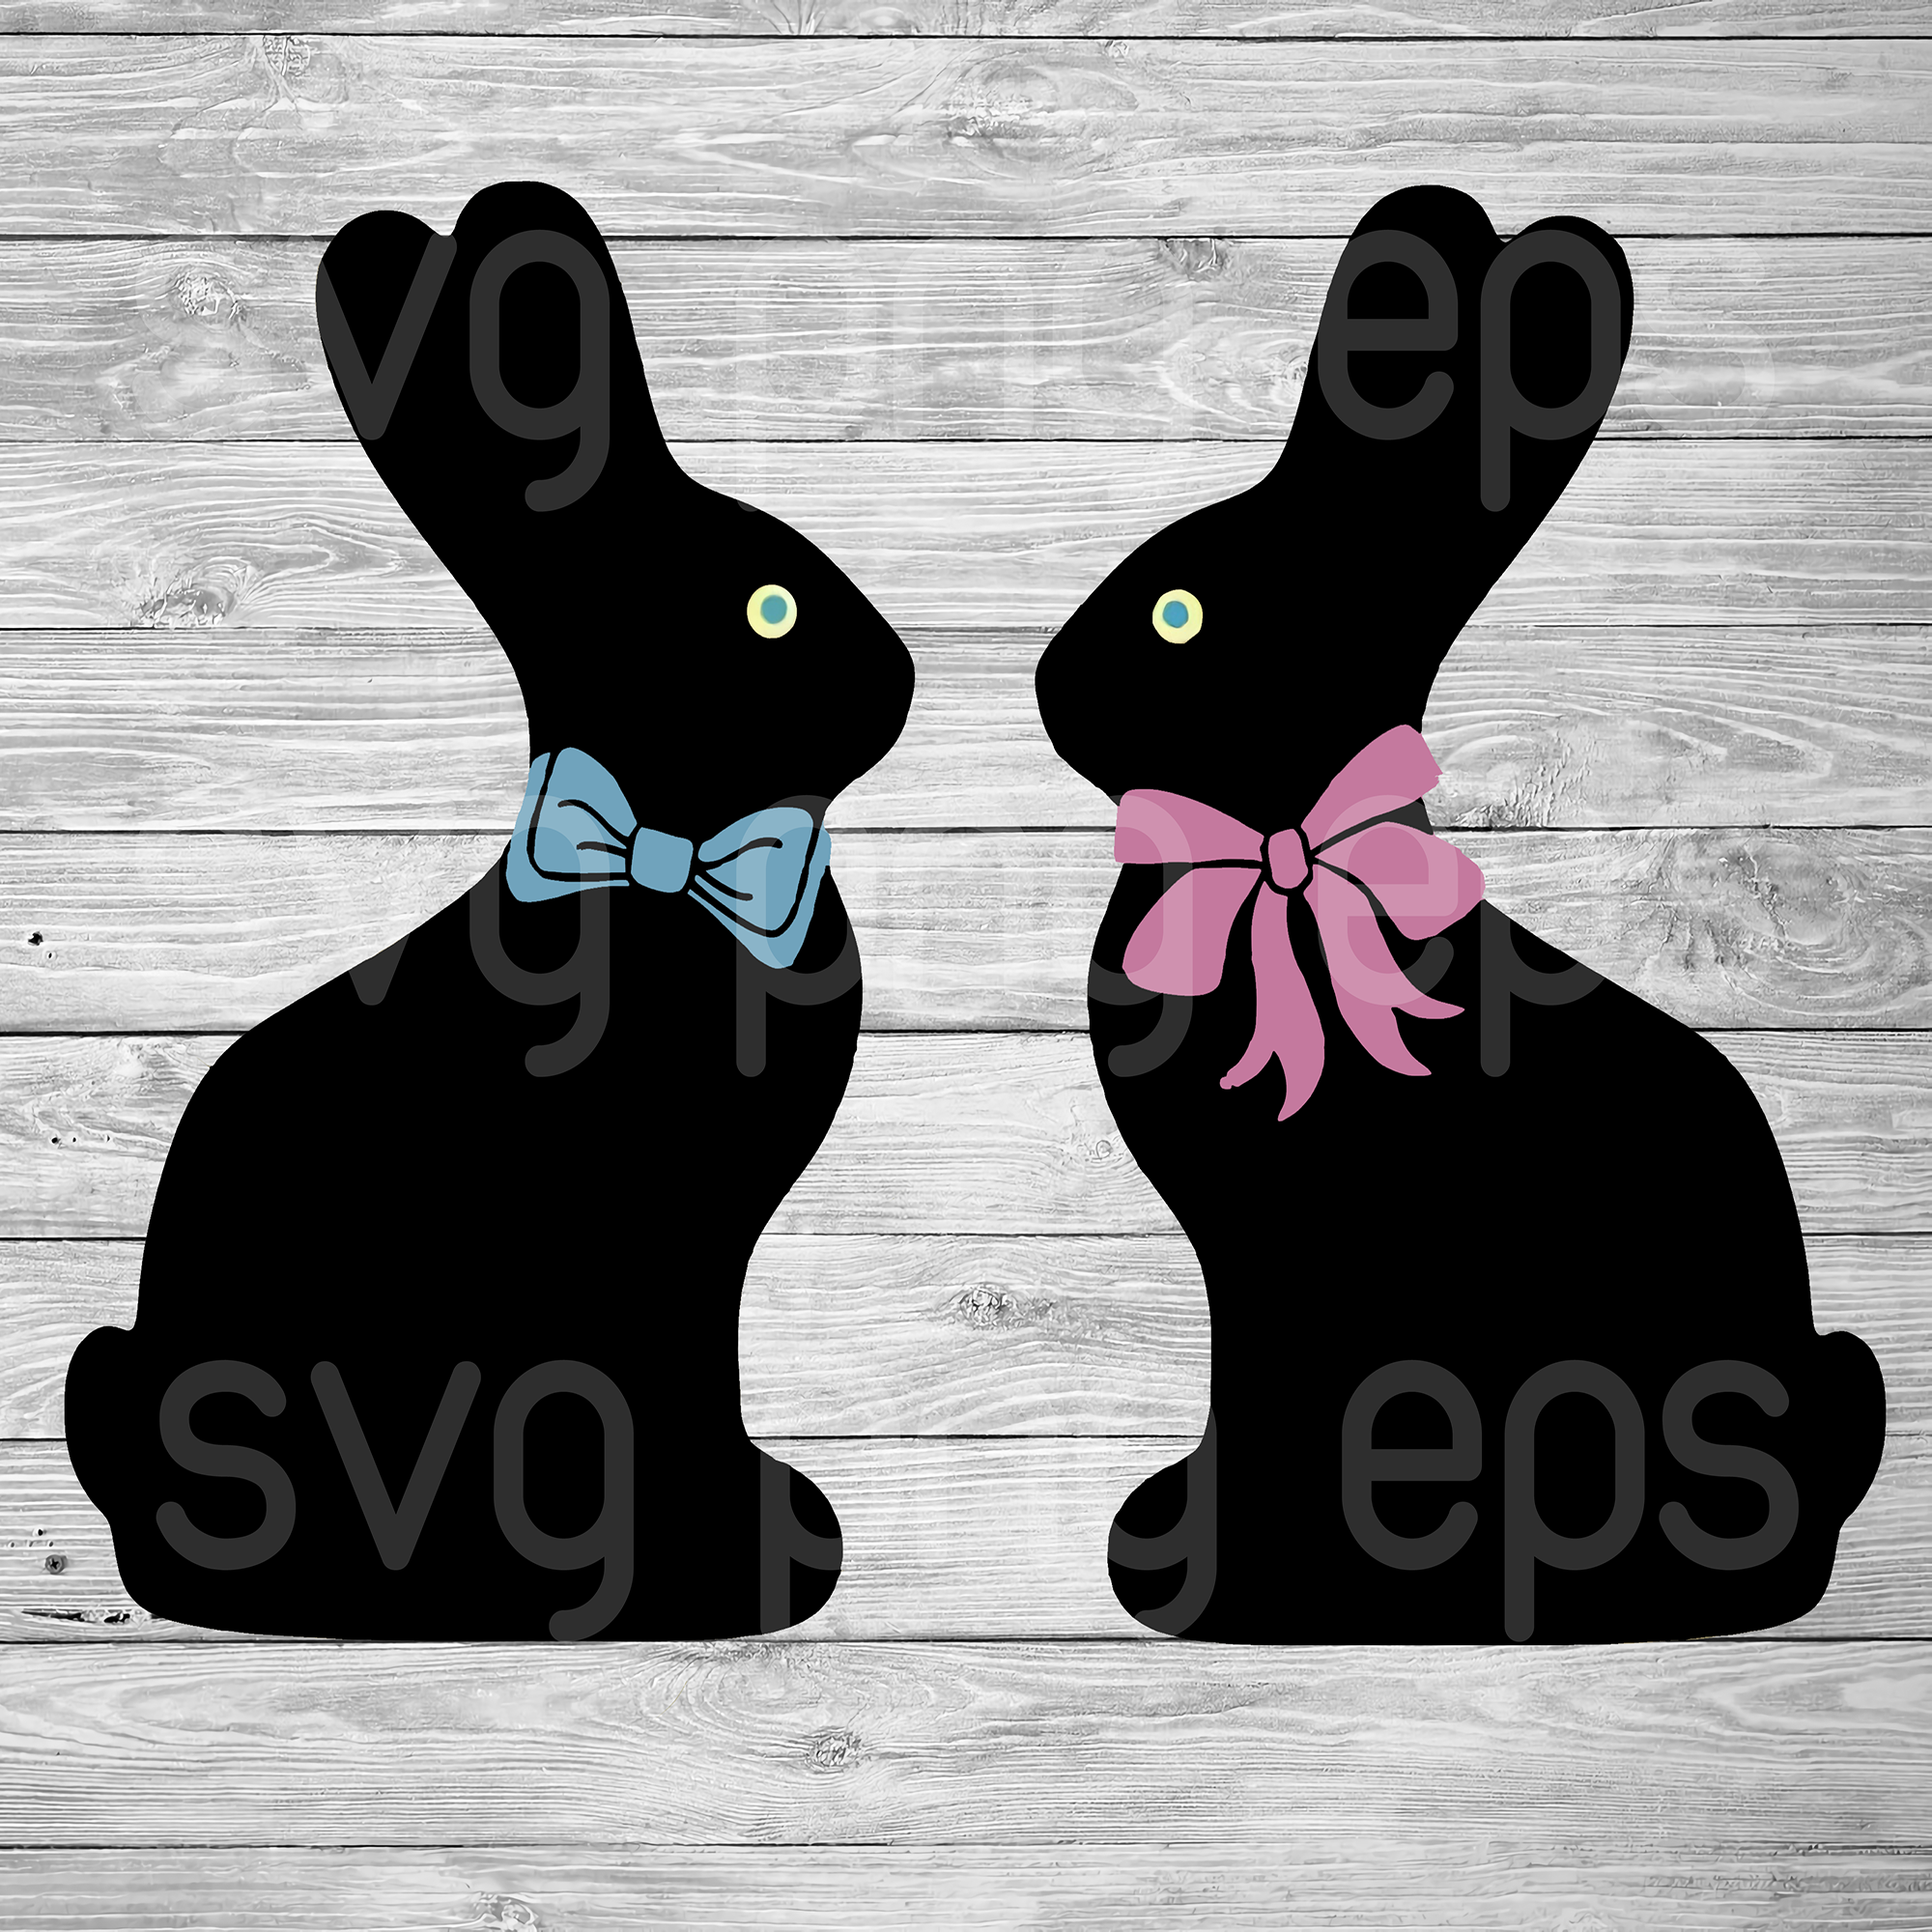 Download Bunny Playboy Logo High Quality Svg Cut Files Best For Unique Craft